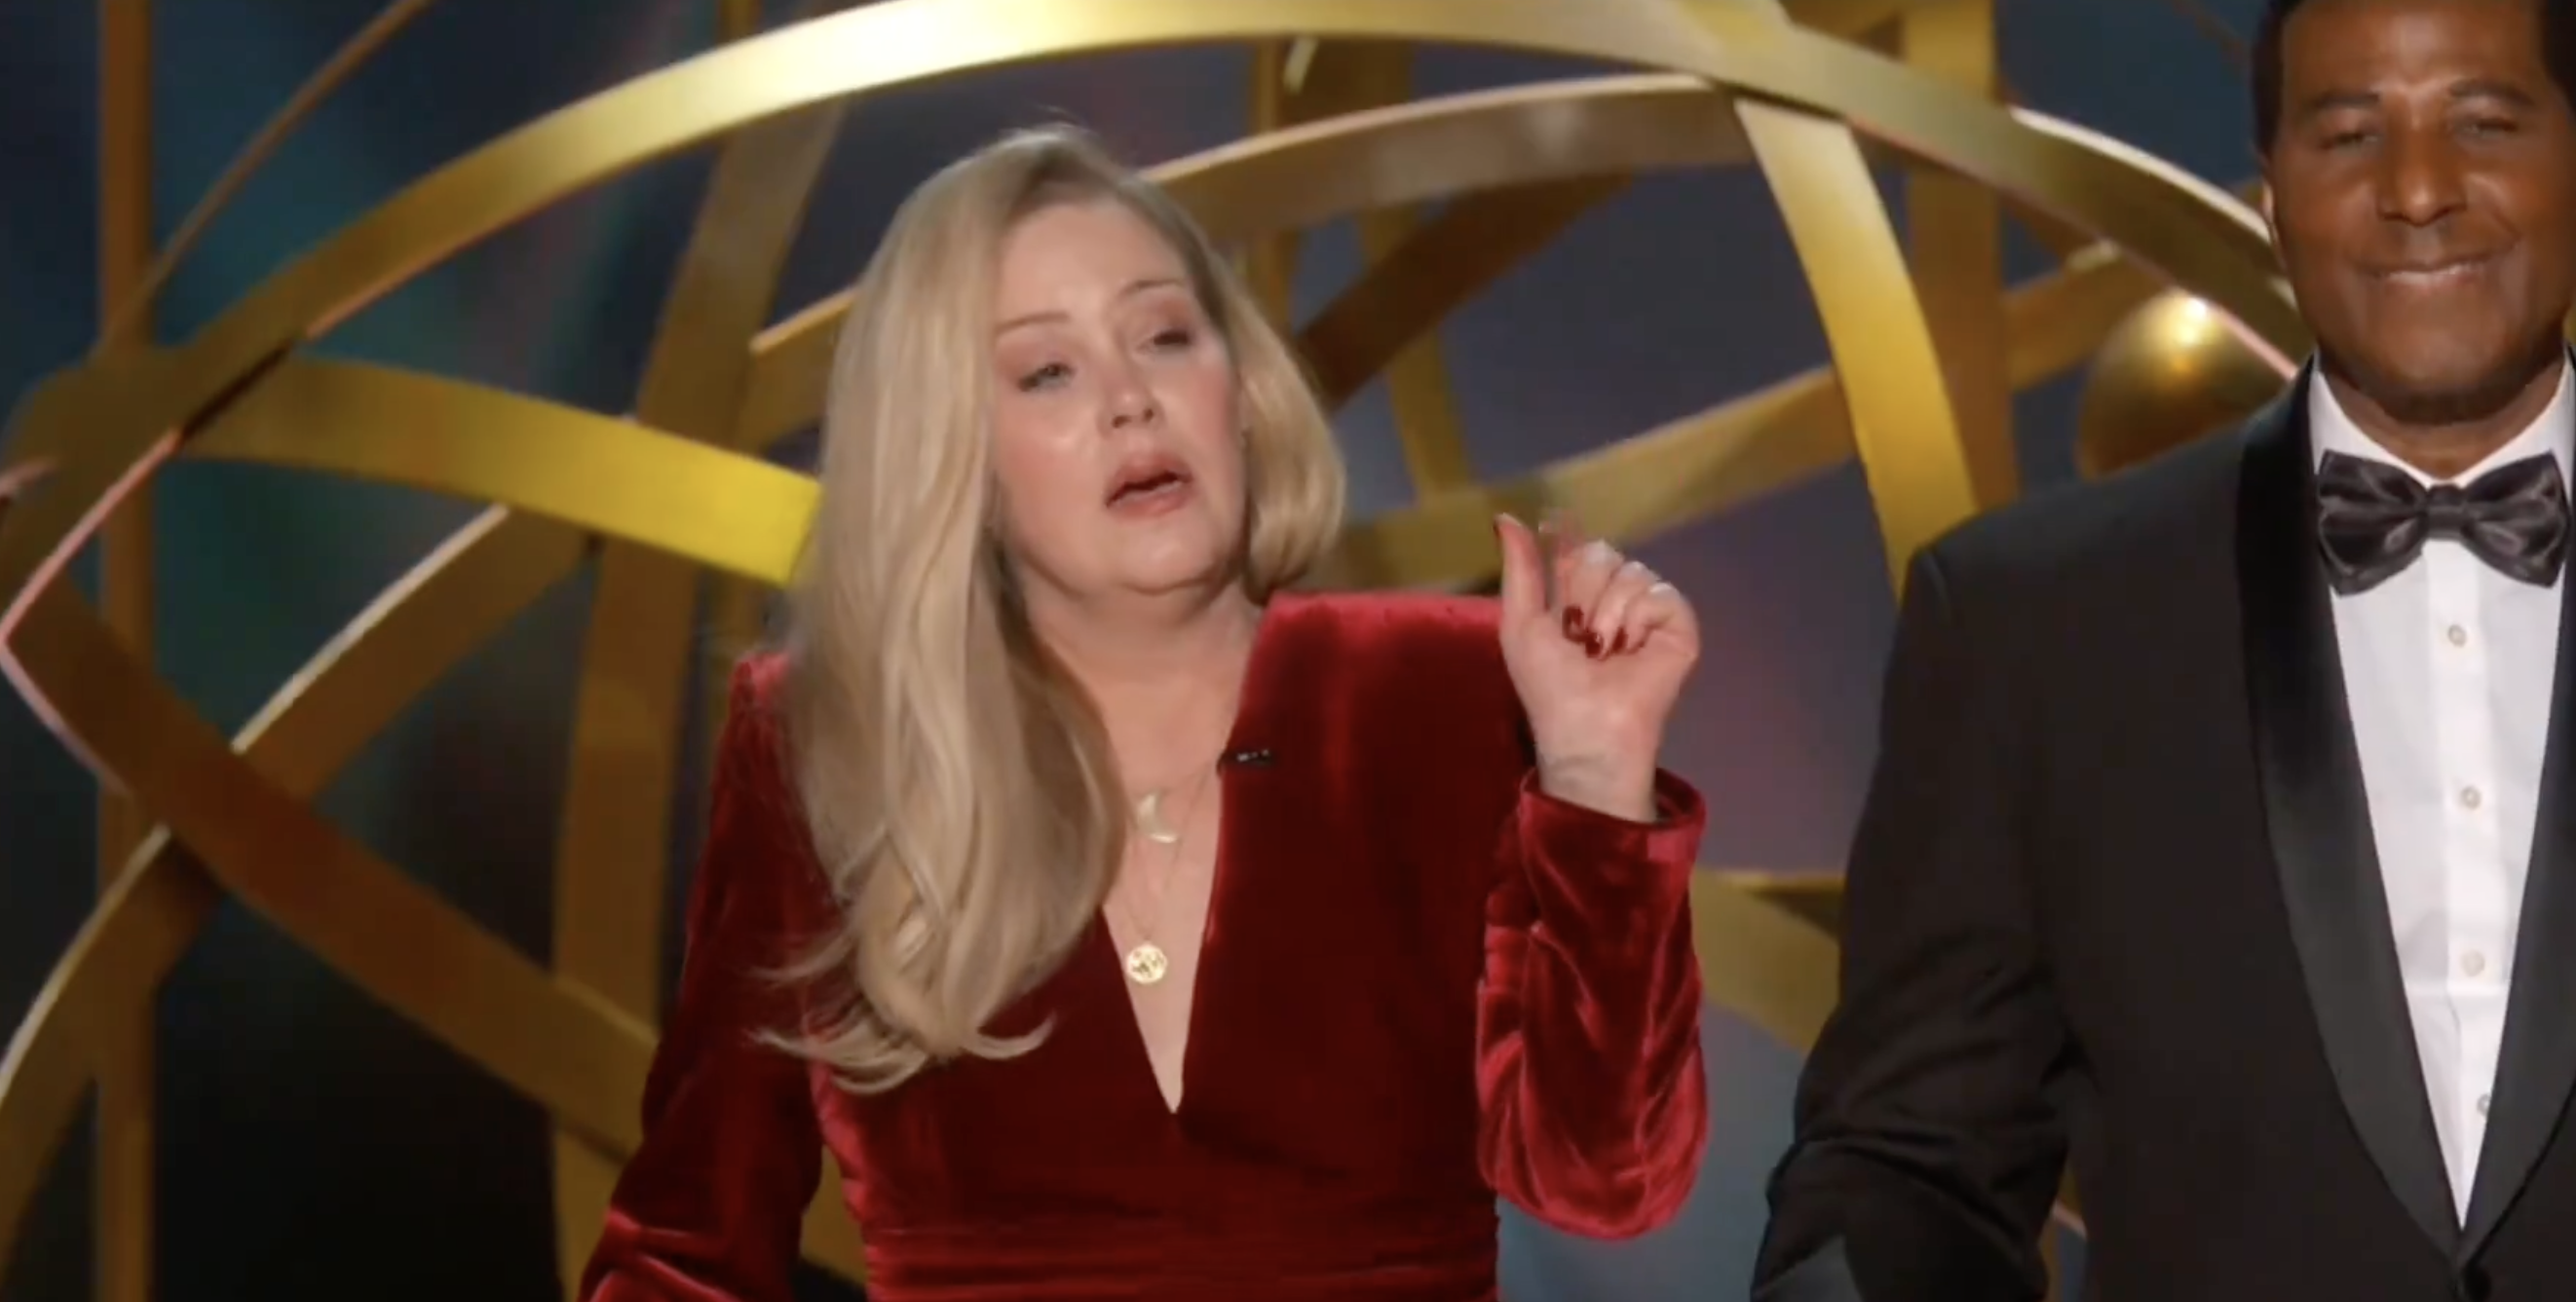 Christina Applegate Makes Surprising Appearance At Emmys, Makes Hilarious Joke About MS